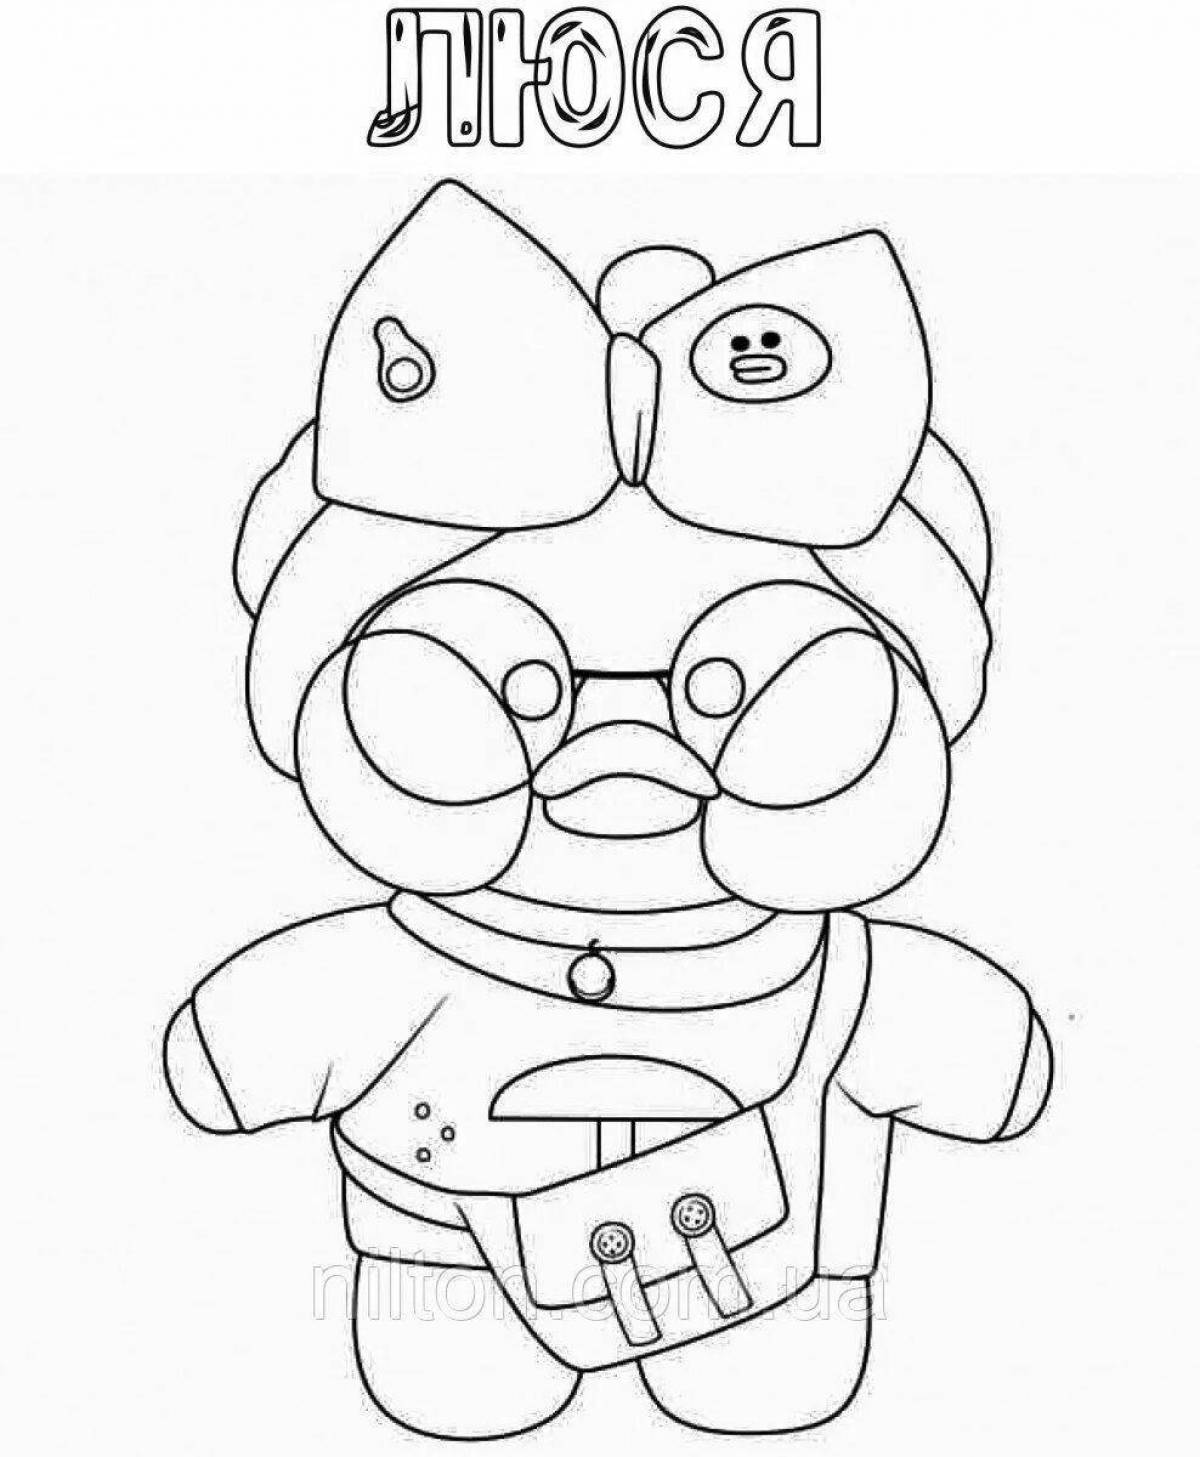 Lalafanfan ducks playful coloring page for kids